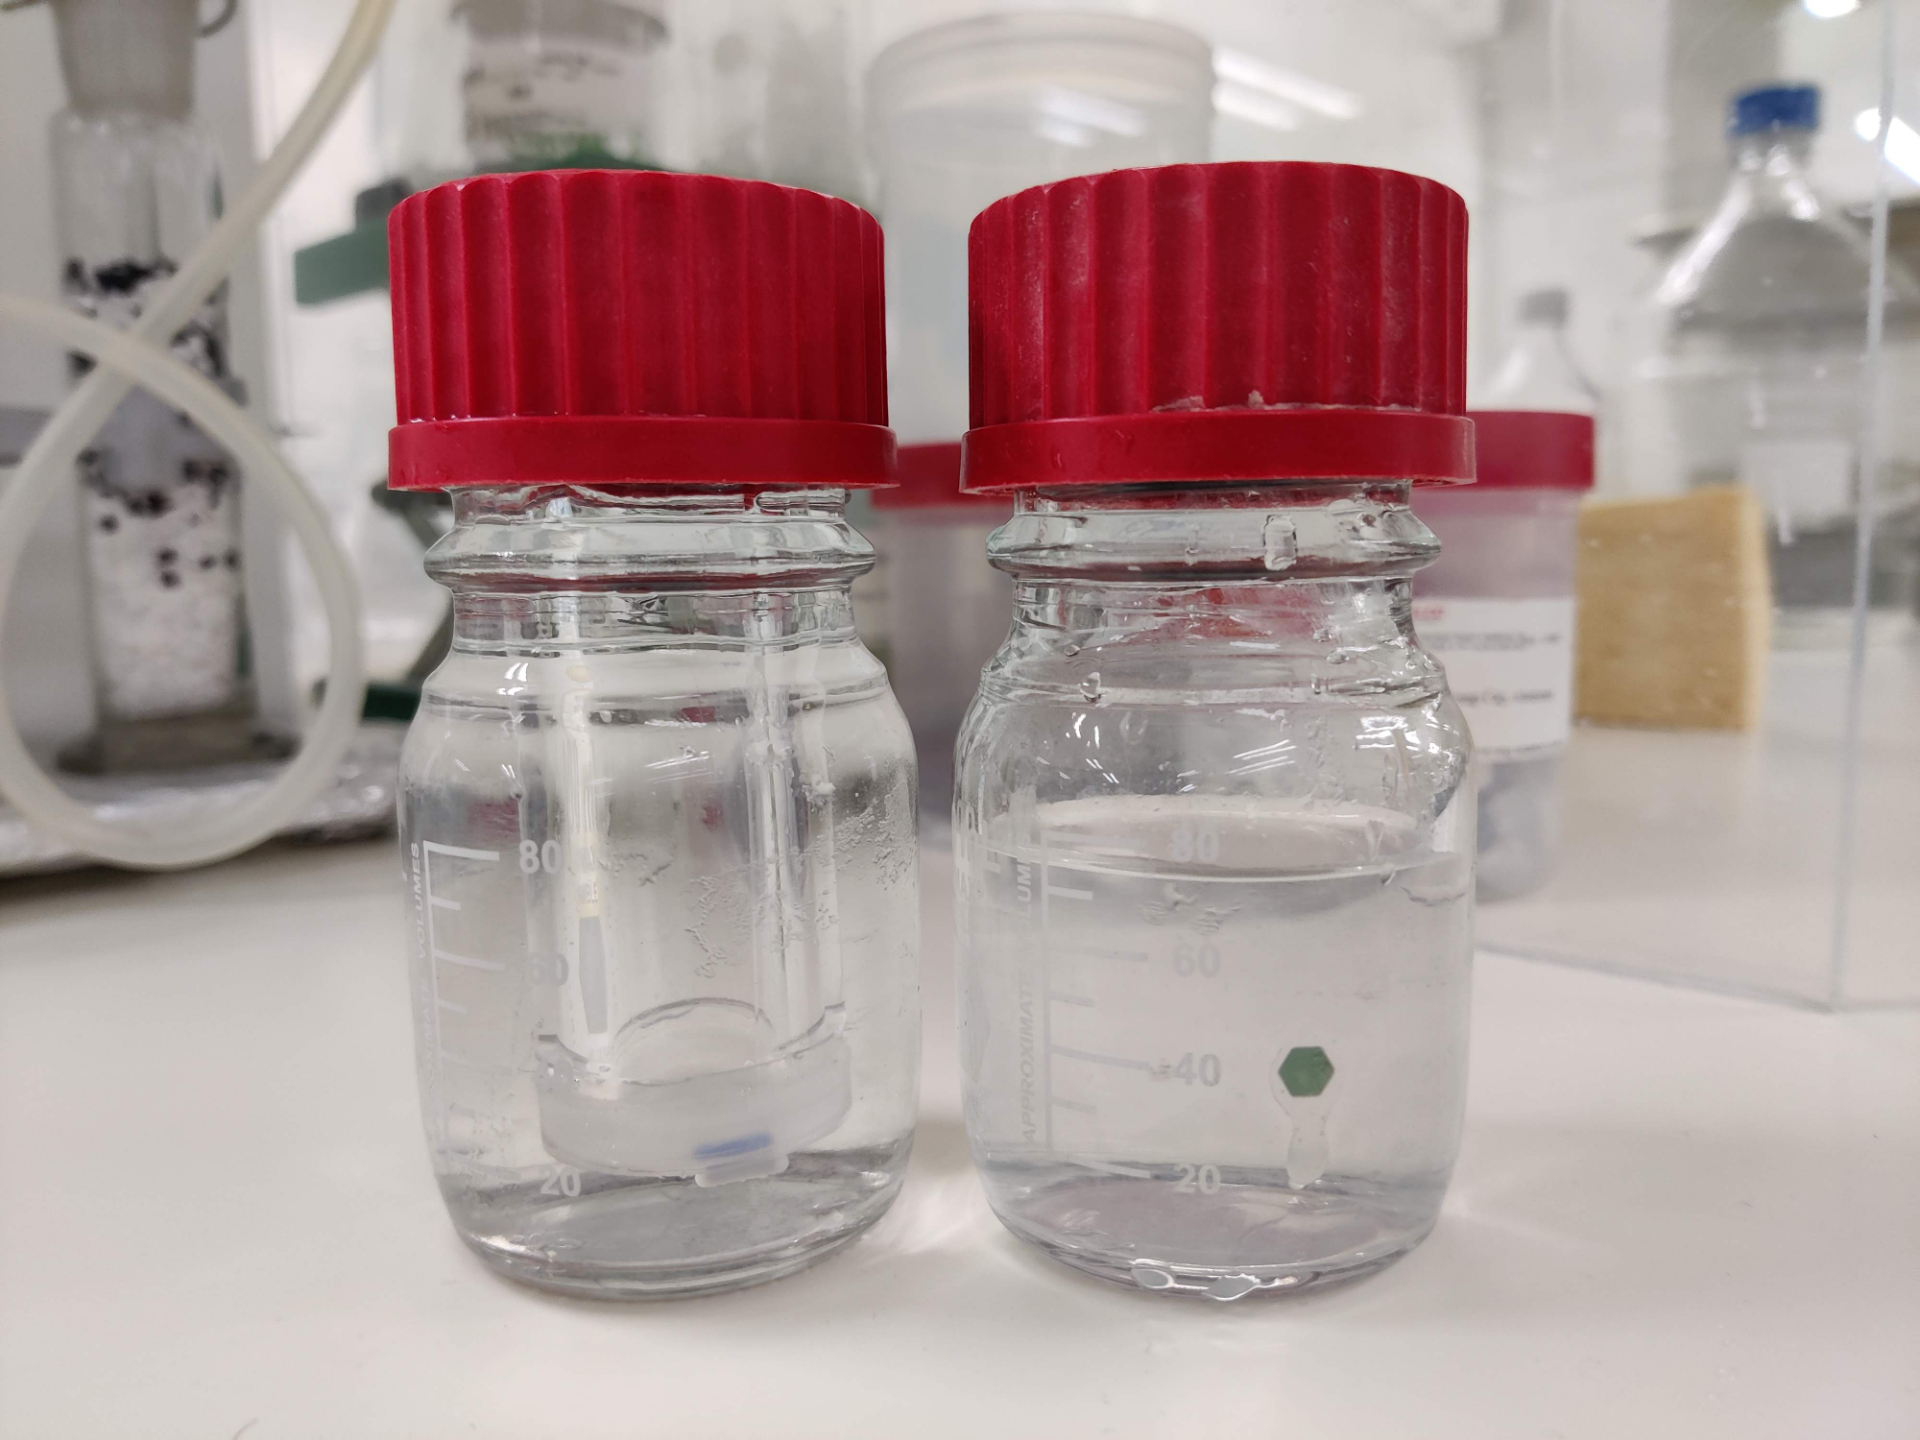 Studying plastic degradation rates with cultures in the lab